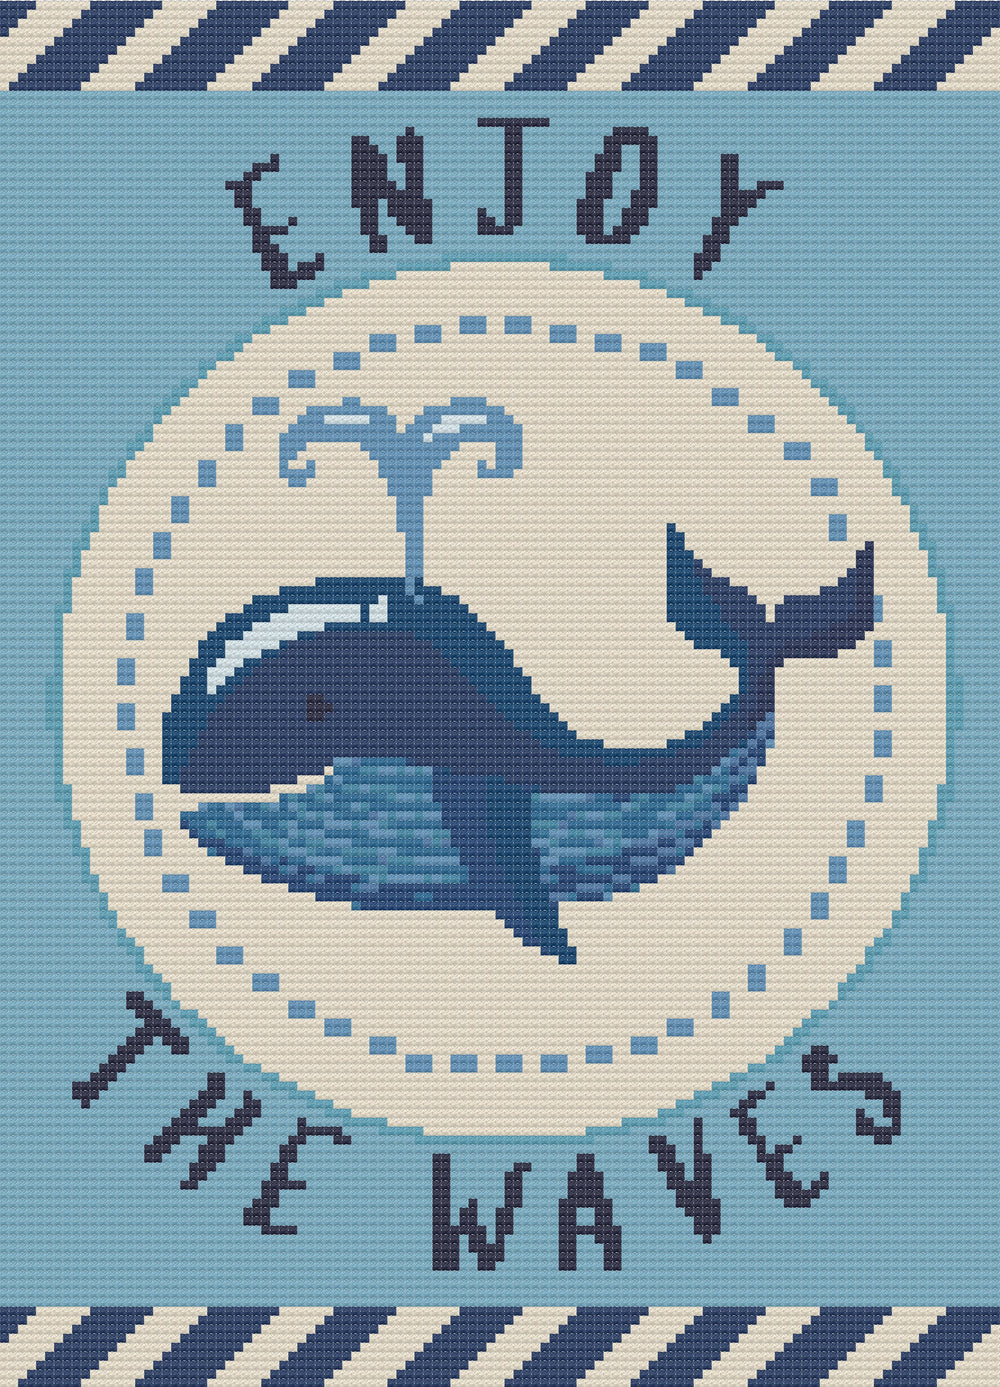 Stitched and framed preview of Enjoy The Waves Counted Cross Stitch Pattern and Kit